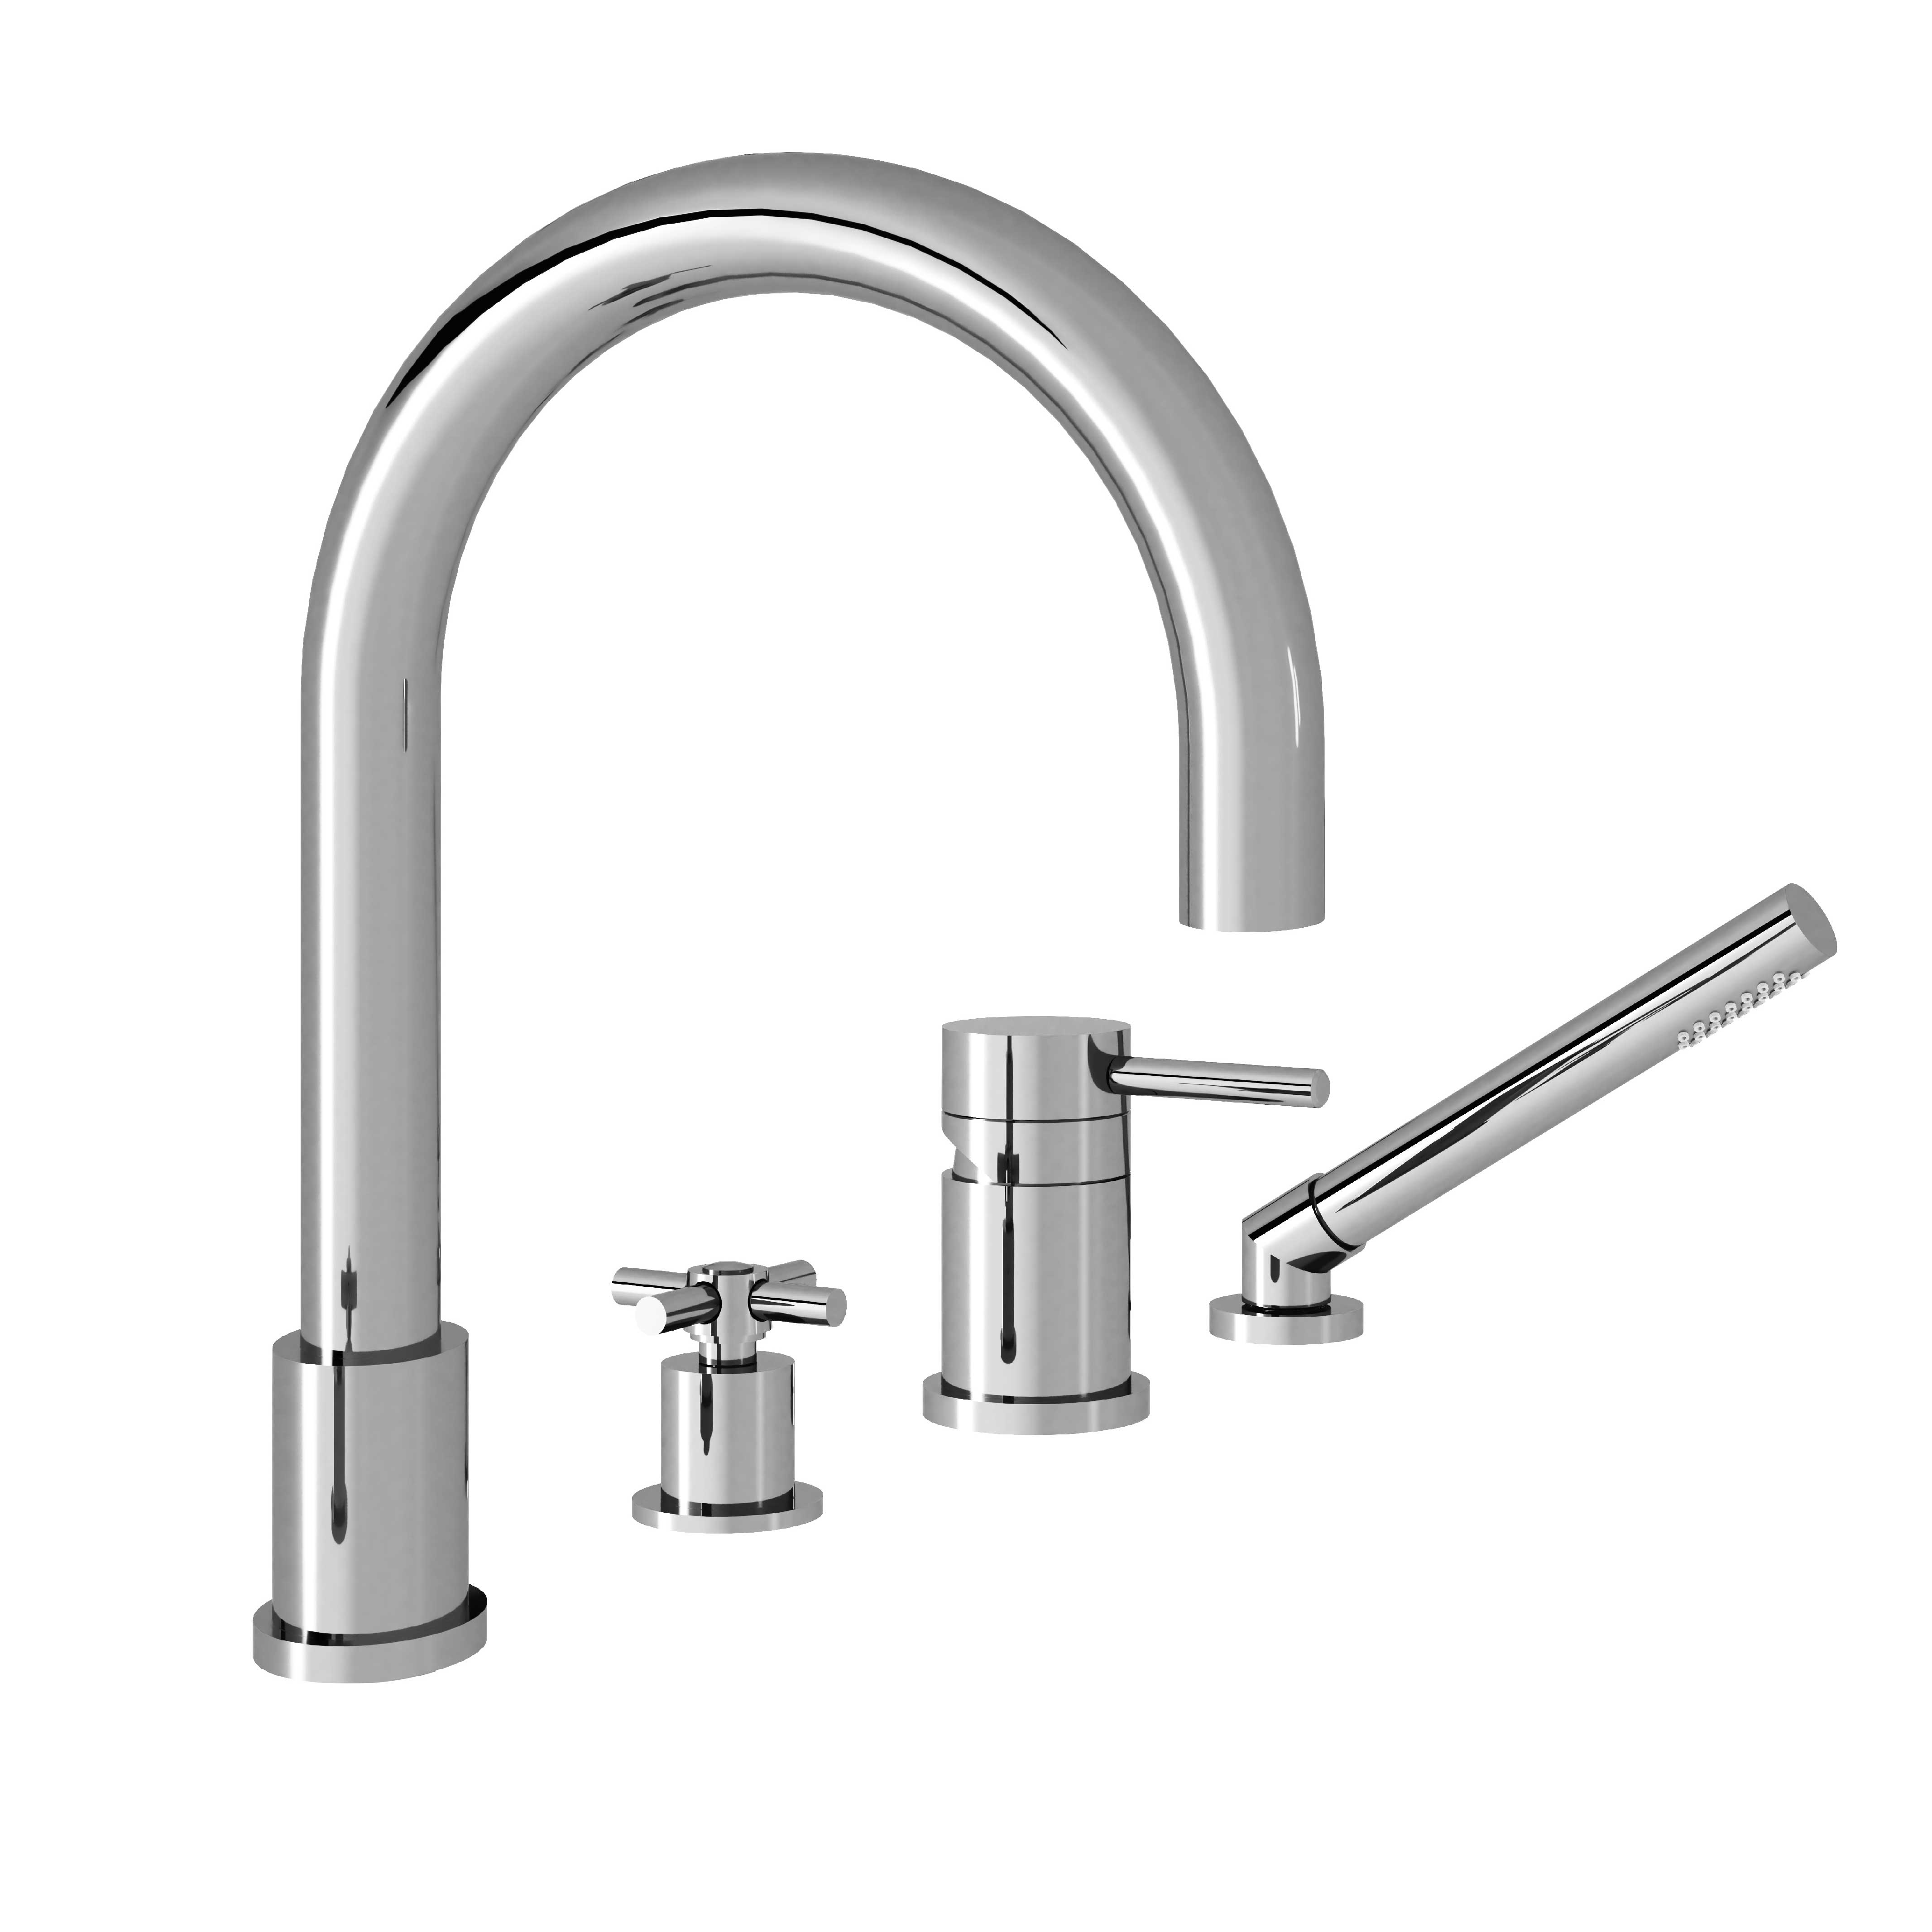 M90-3304M 4-hole single-lever bath and shower mixer